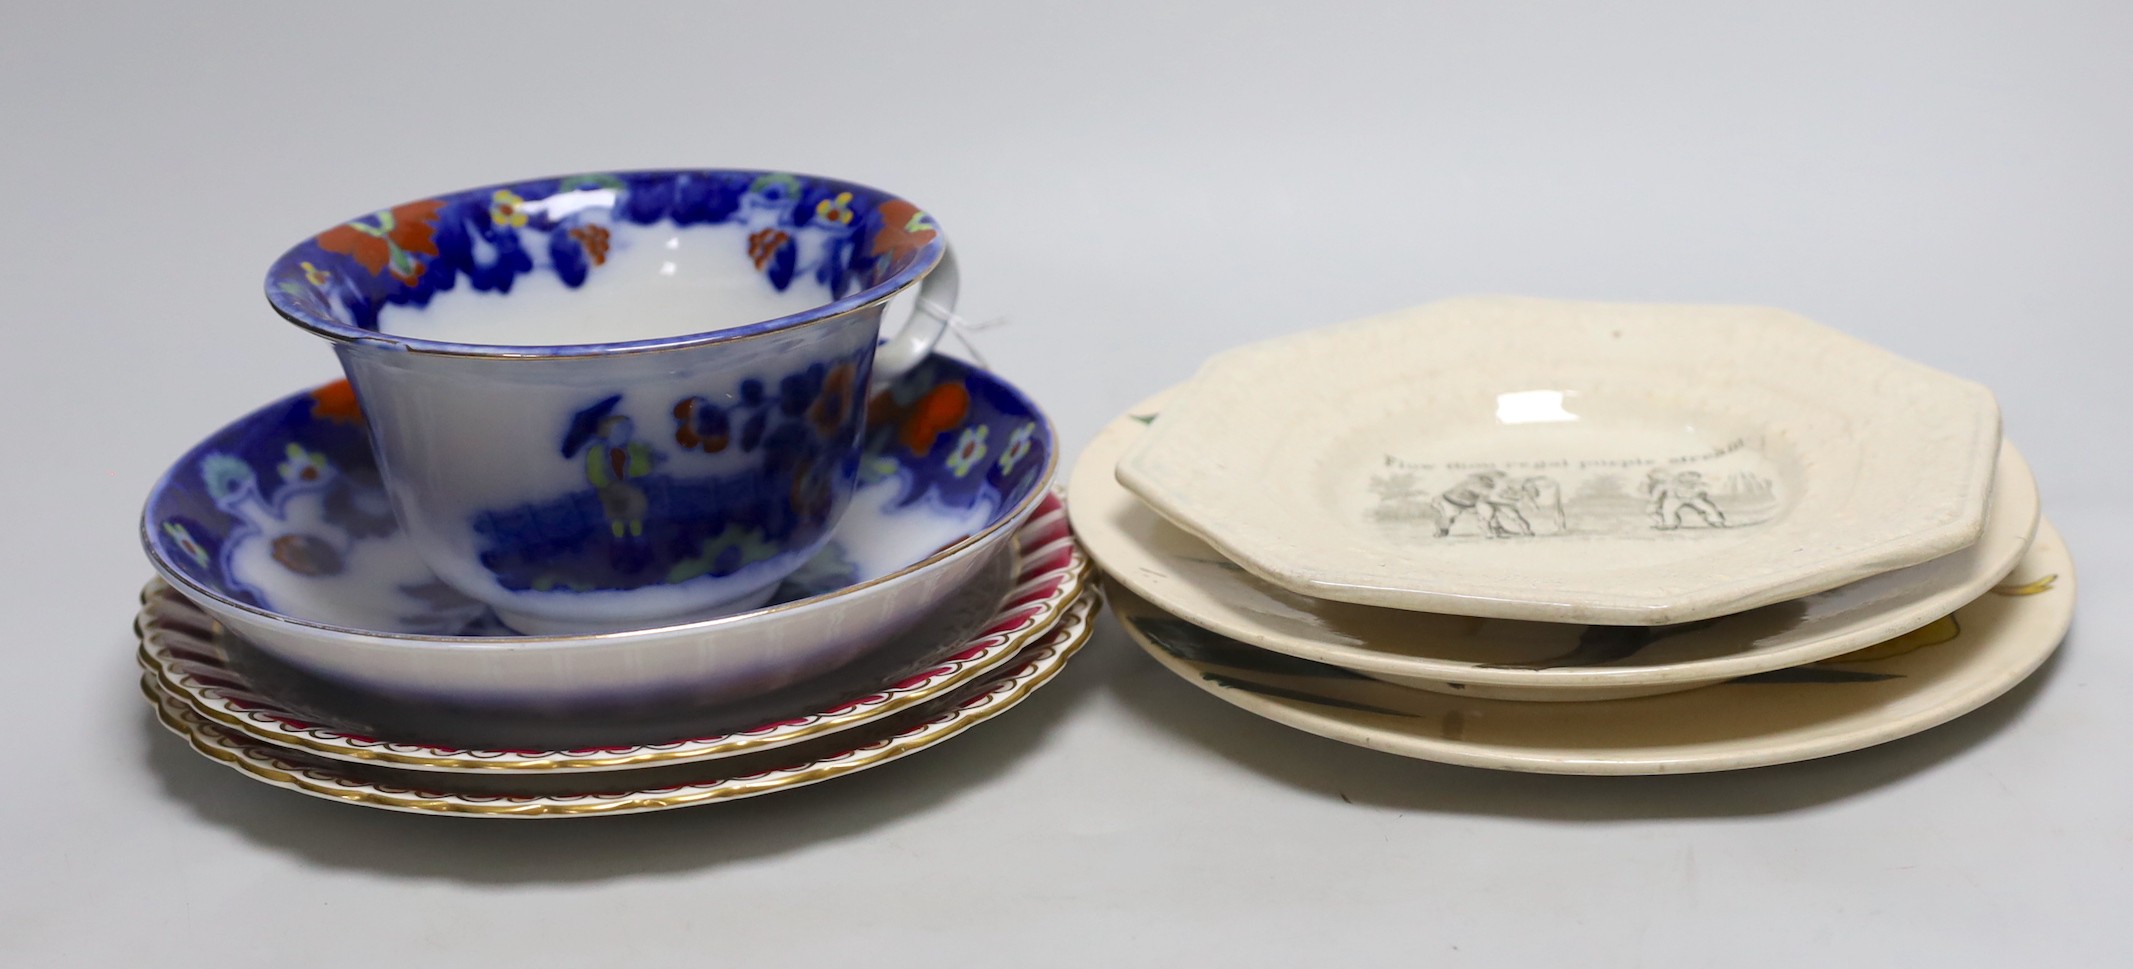 A pair of Doulton plates, a pair of floral plates, a Victorian nursery plate and a large flow blue cup and saucer